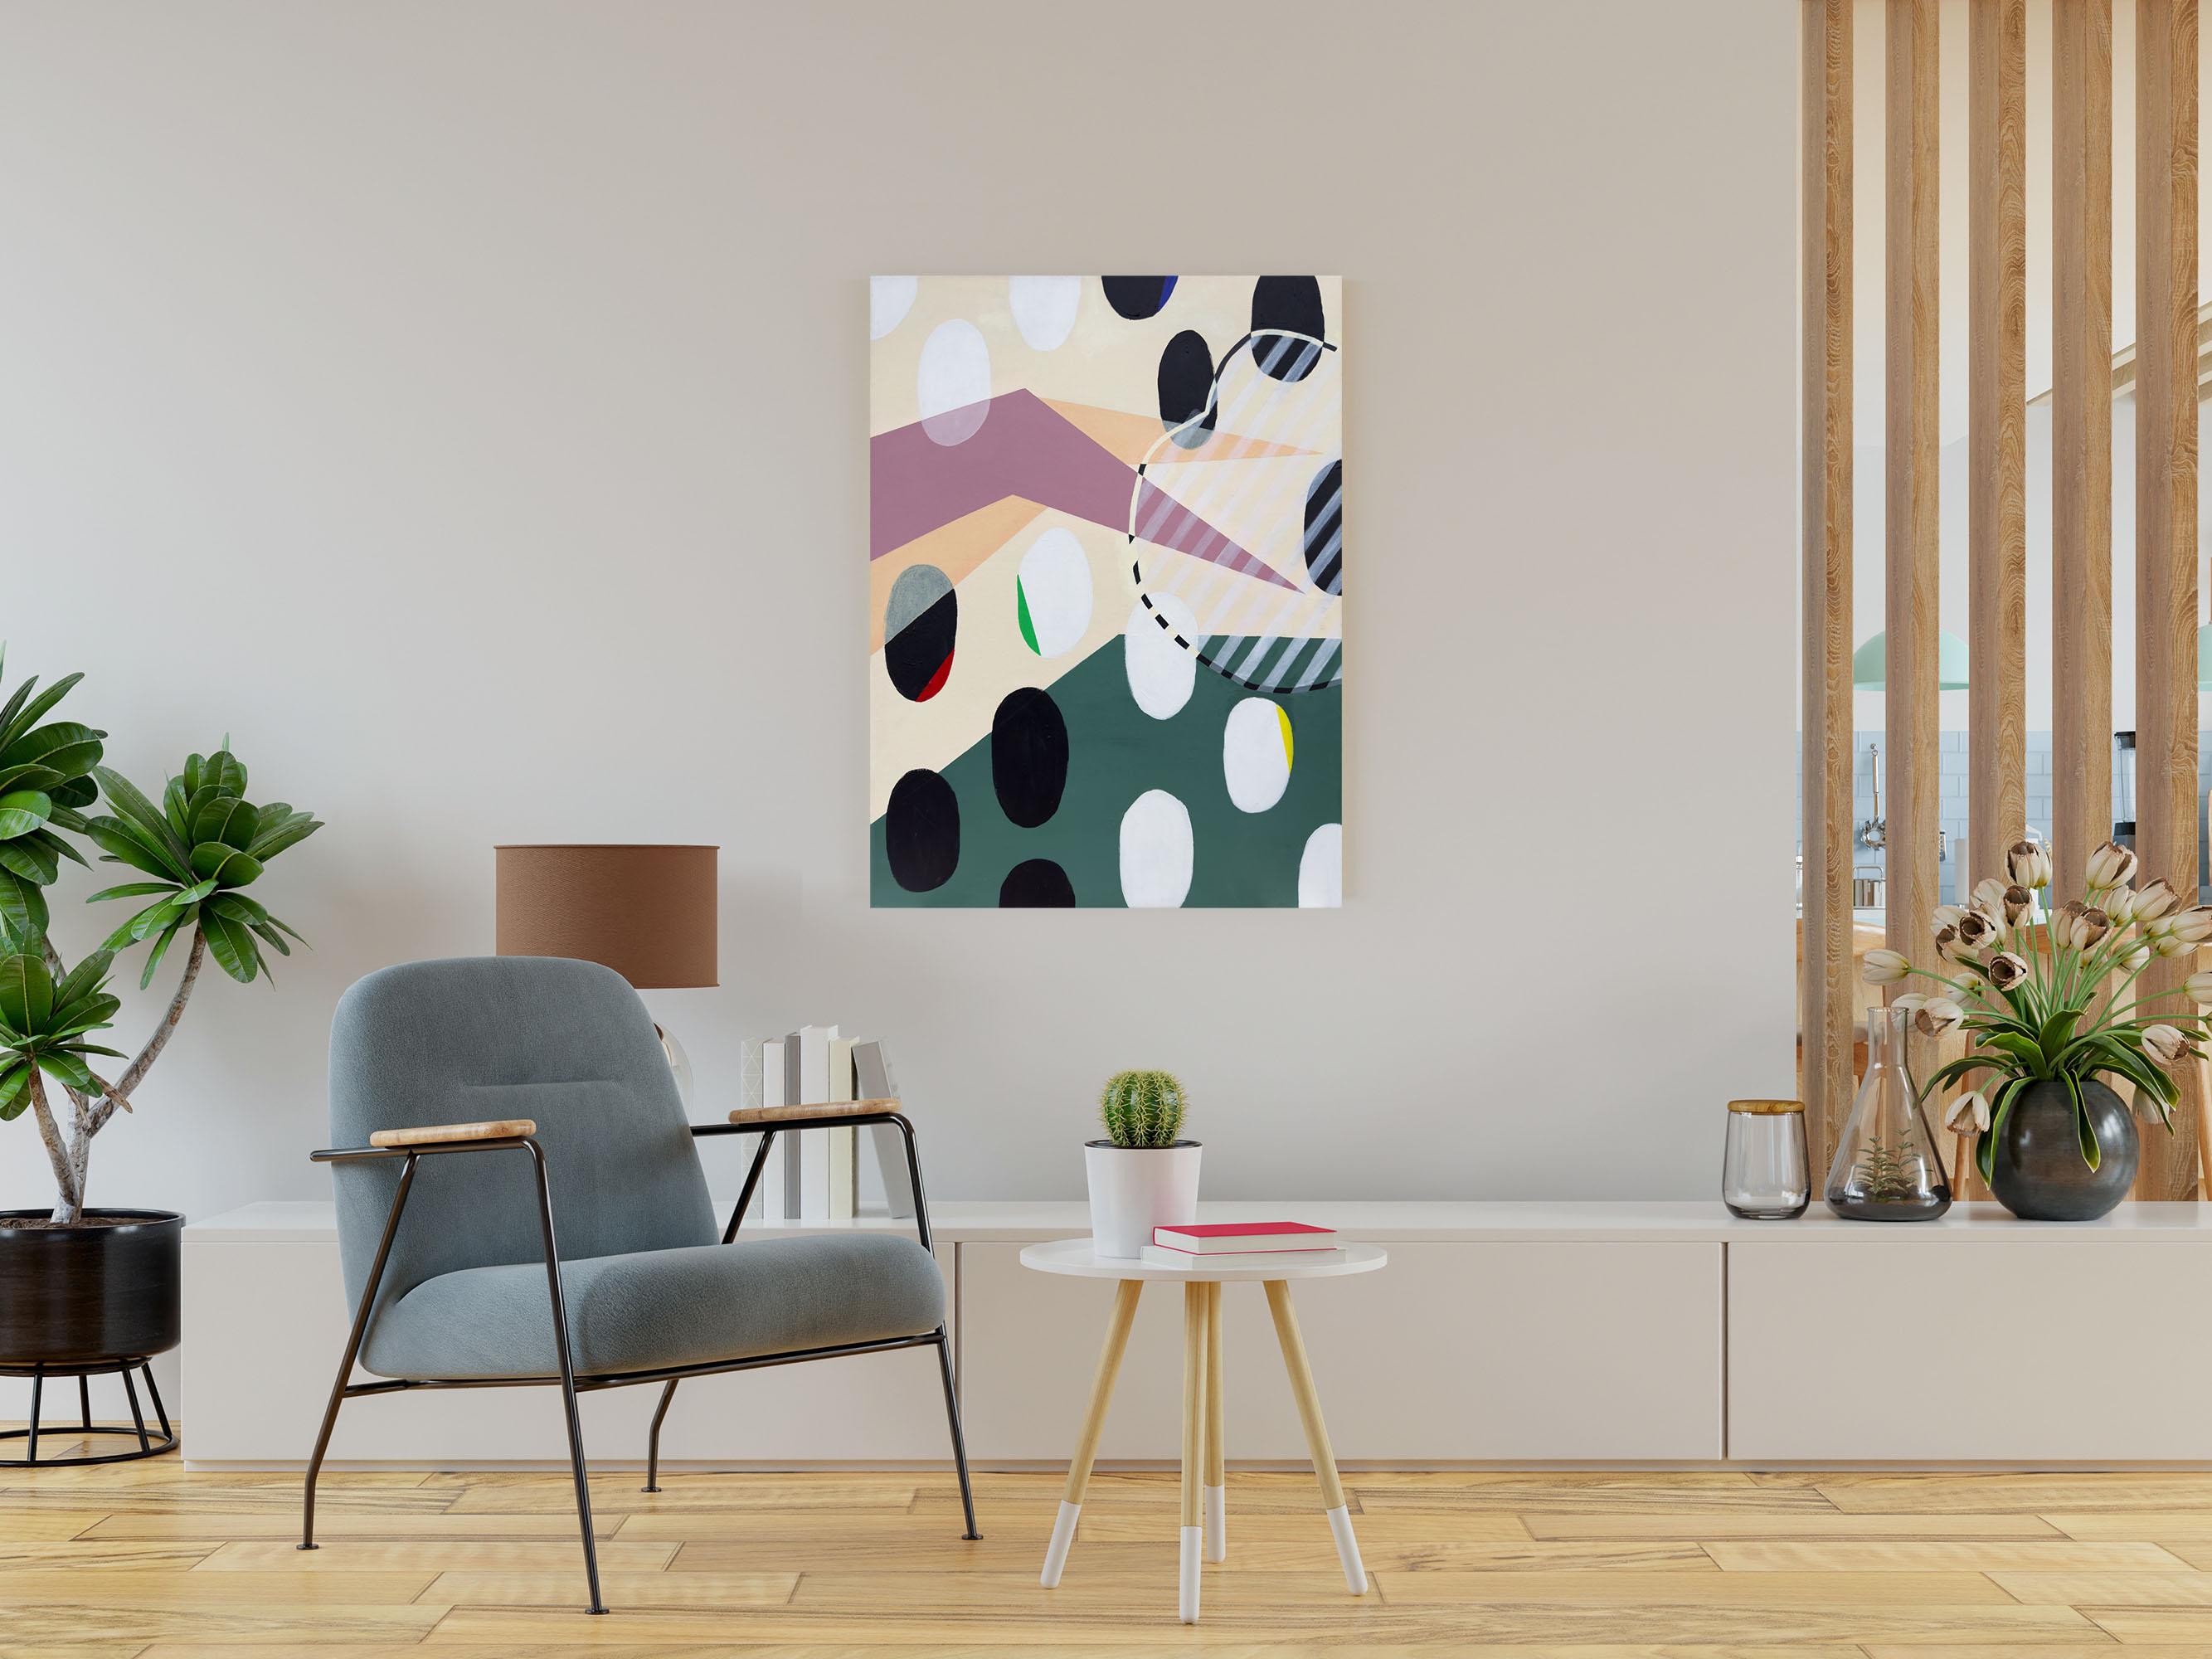 One from a series of two abstract paintings made in 2022 by Amanda Andersen. These artworks began with the idea of a mountain range simplified into large layered shapes, a disoriented horizon line touched by wind and weather patterns. This piece has